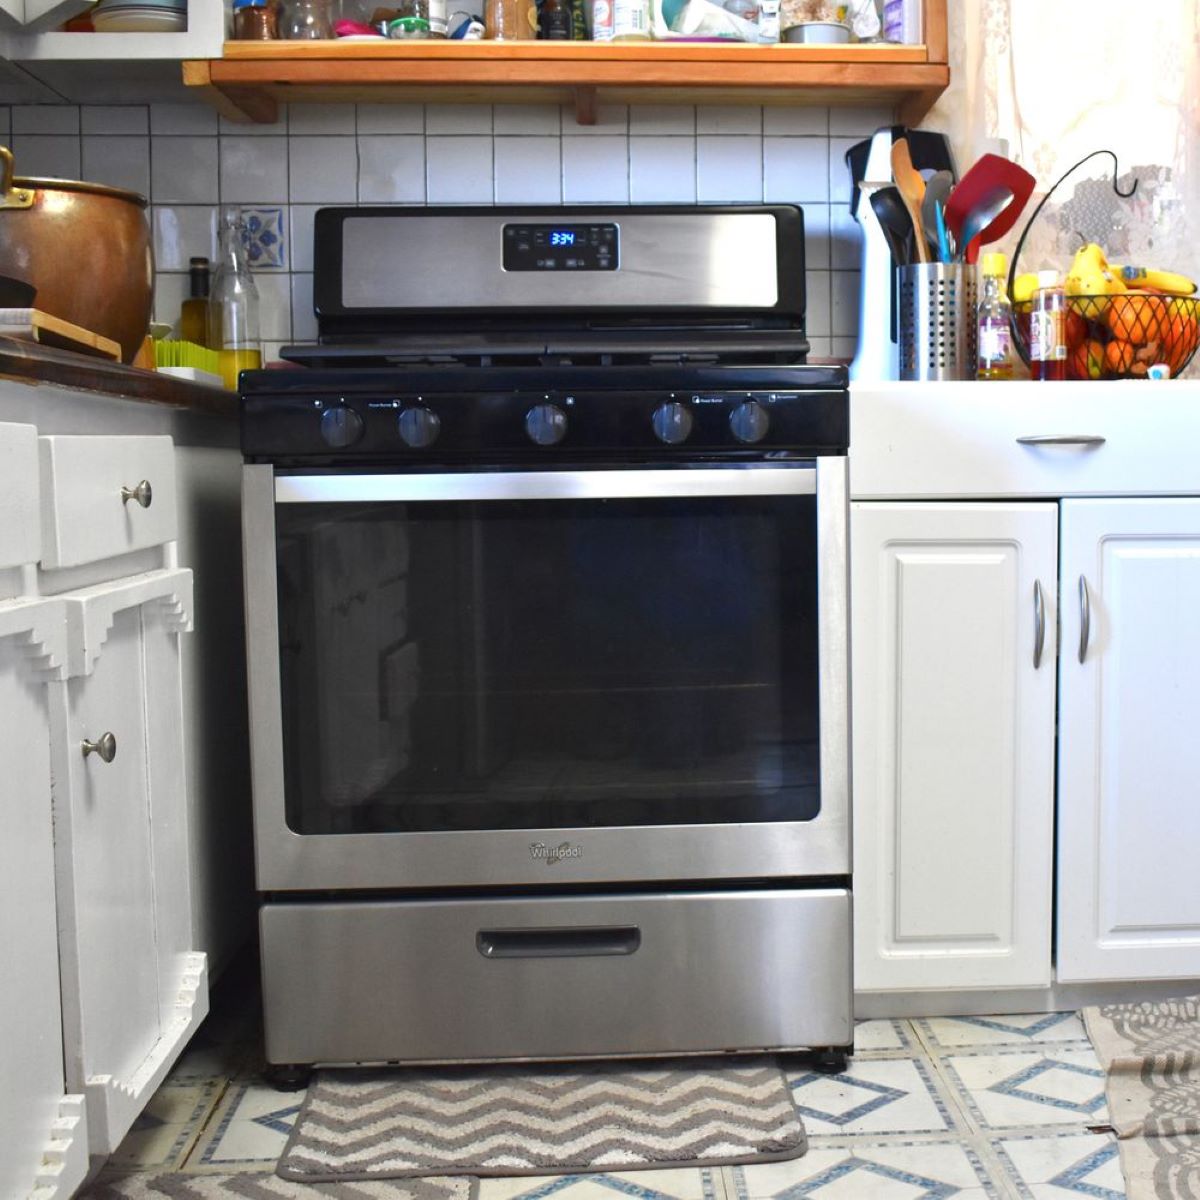 How To Fix The Error Code F20 For Whirlpool Oven & Range